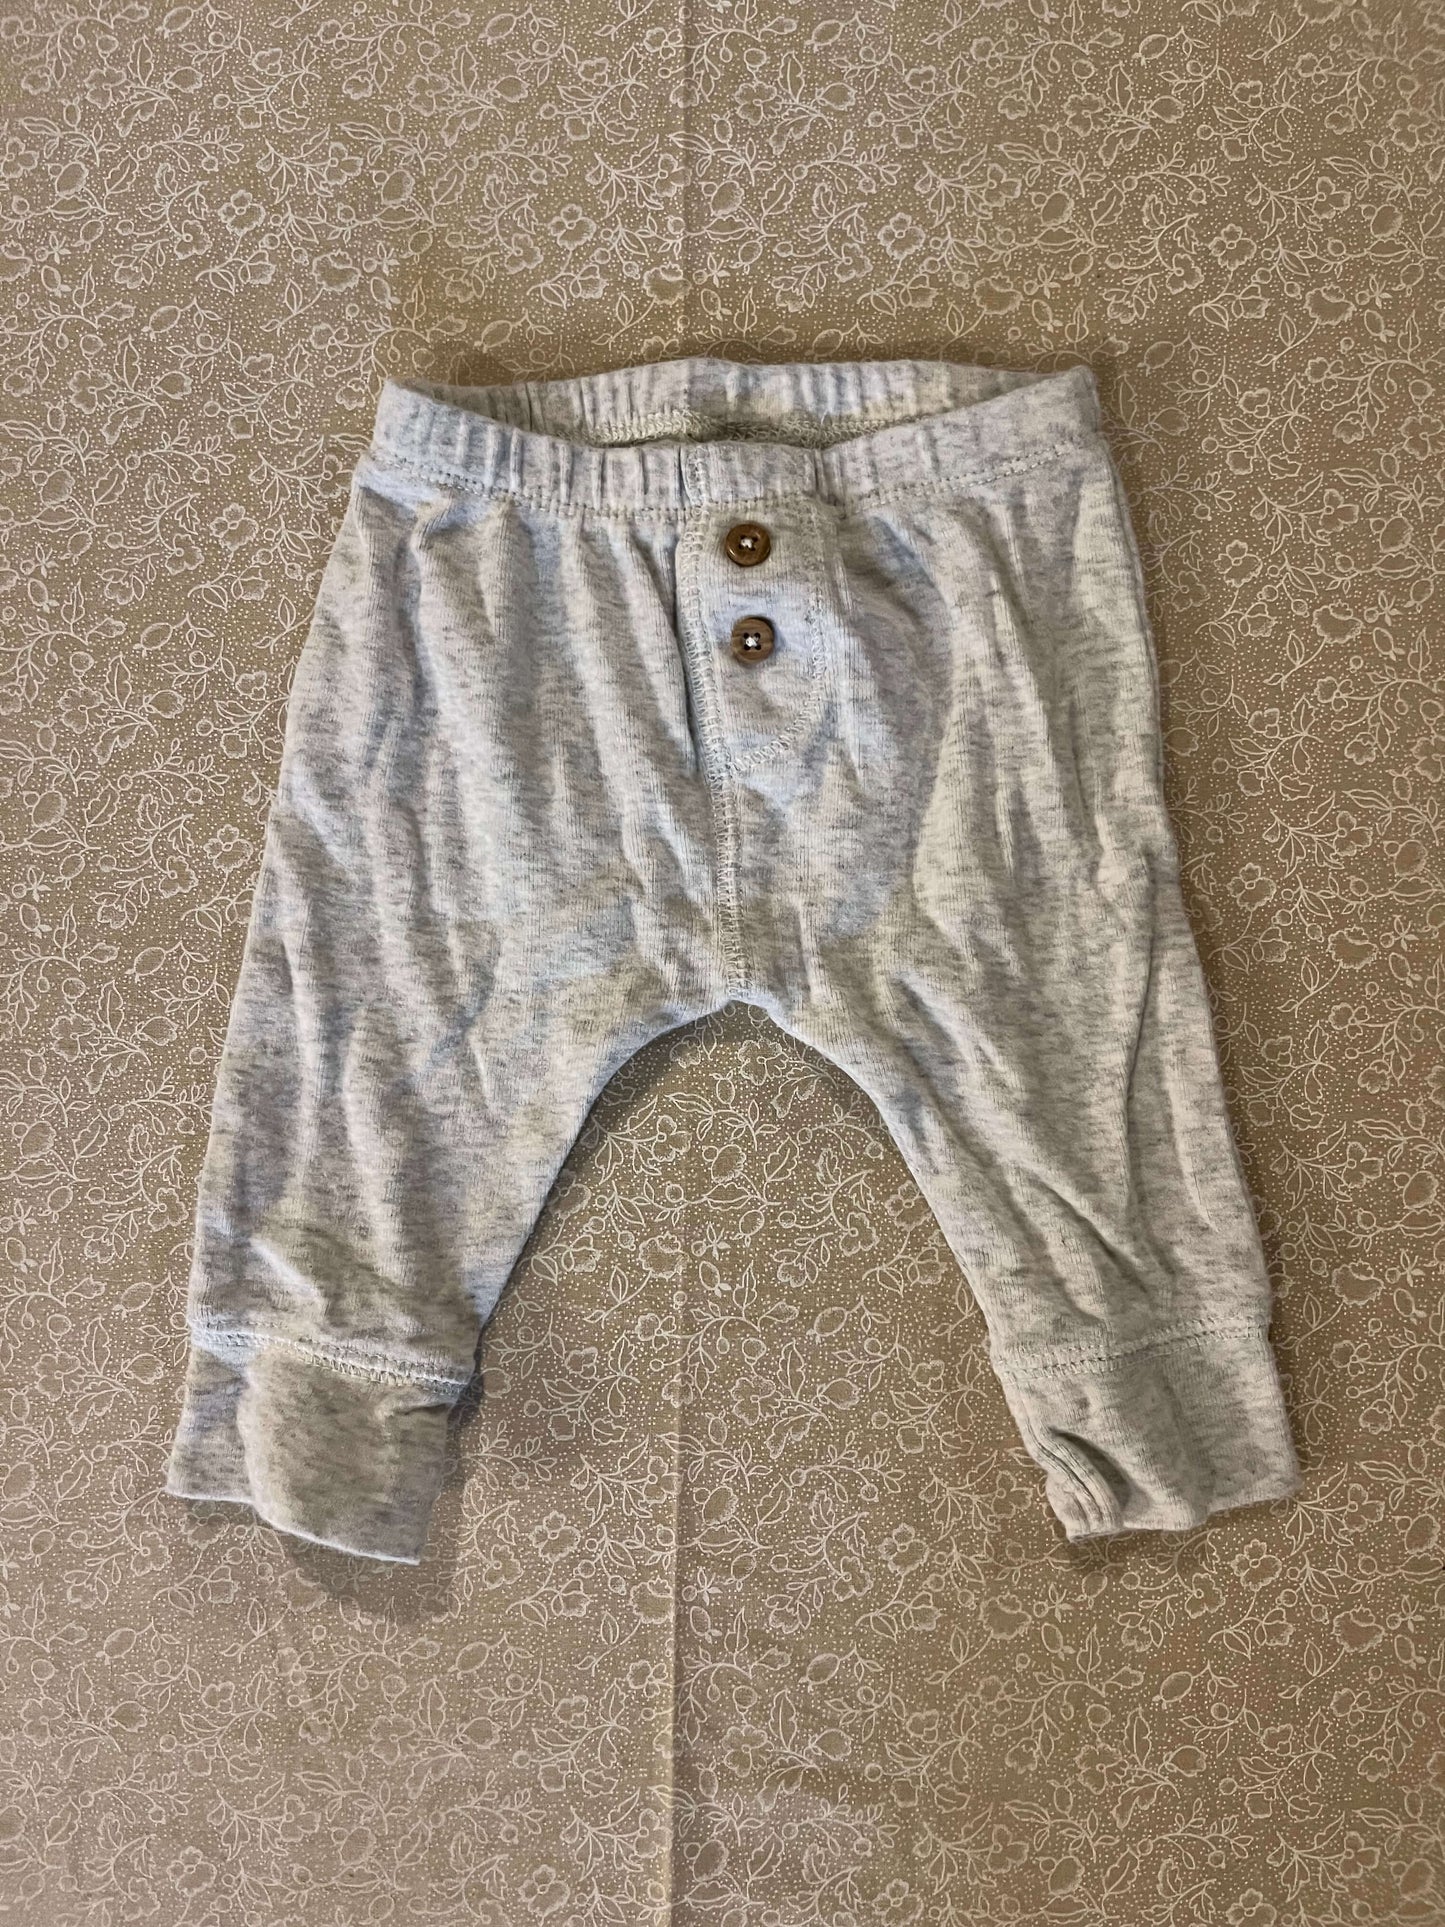 3-month-pants-carters-white-brown-button